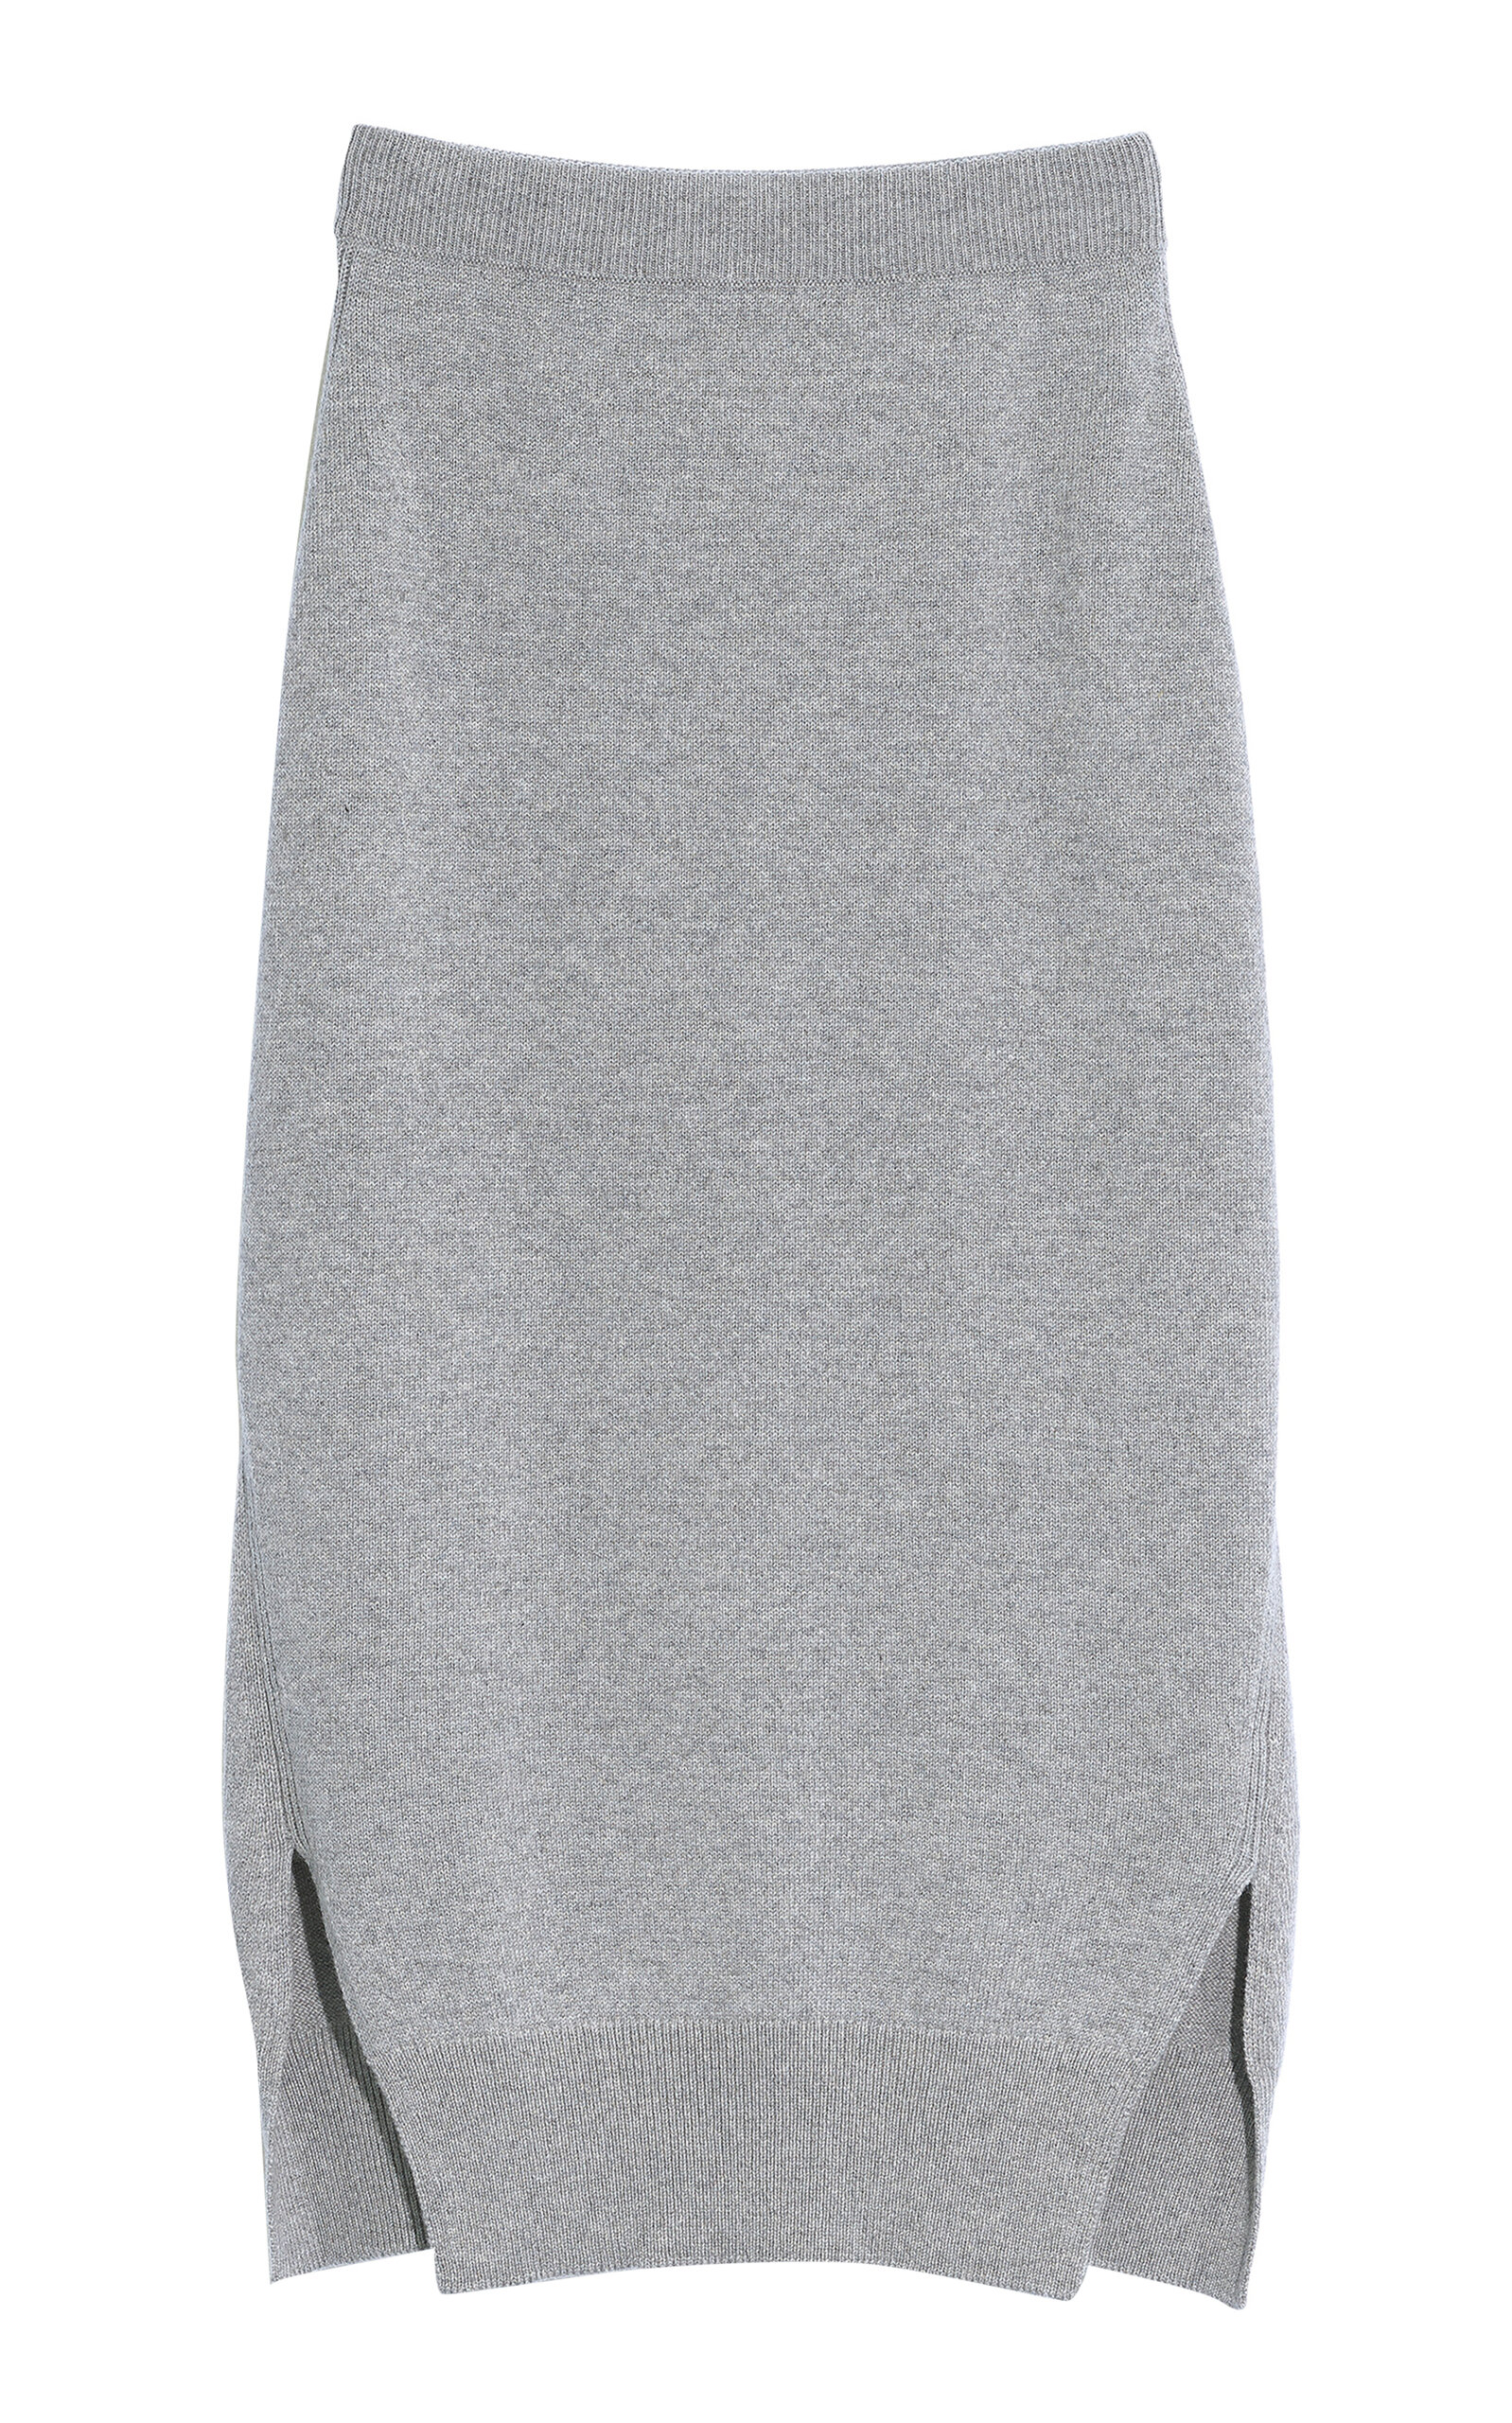 Barrie Cashmere Midi Skirt In Grey